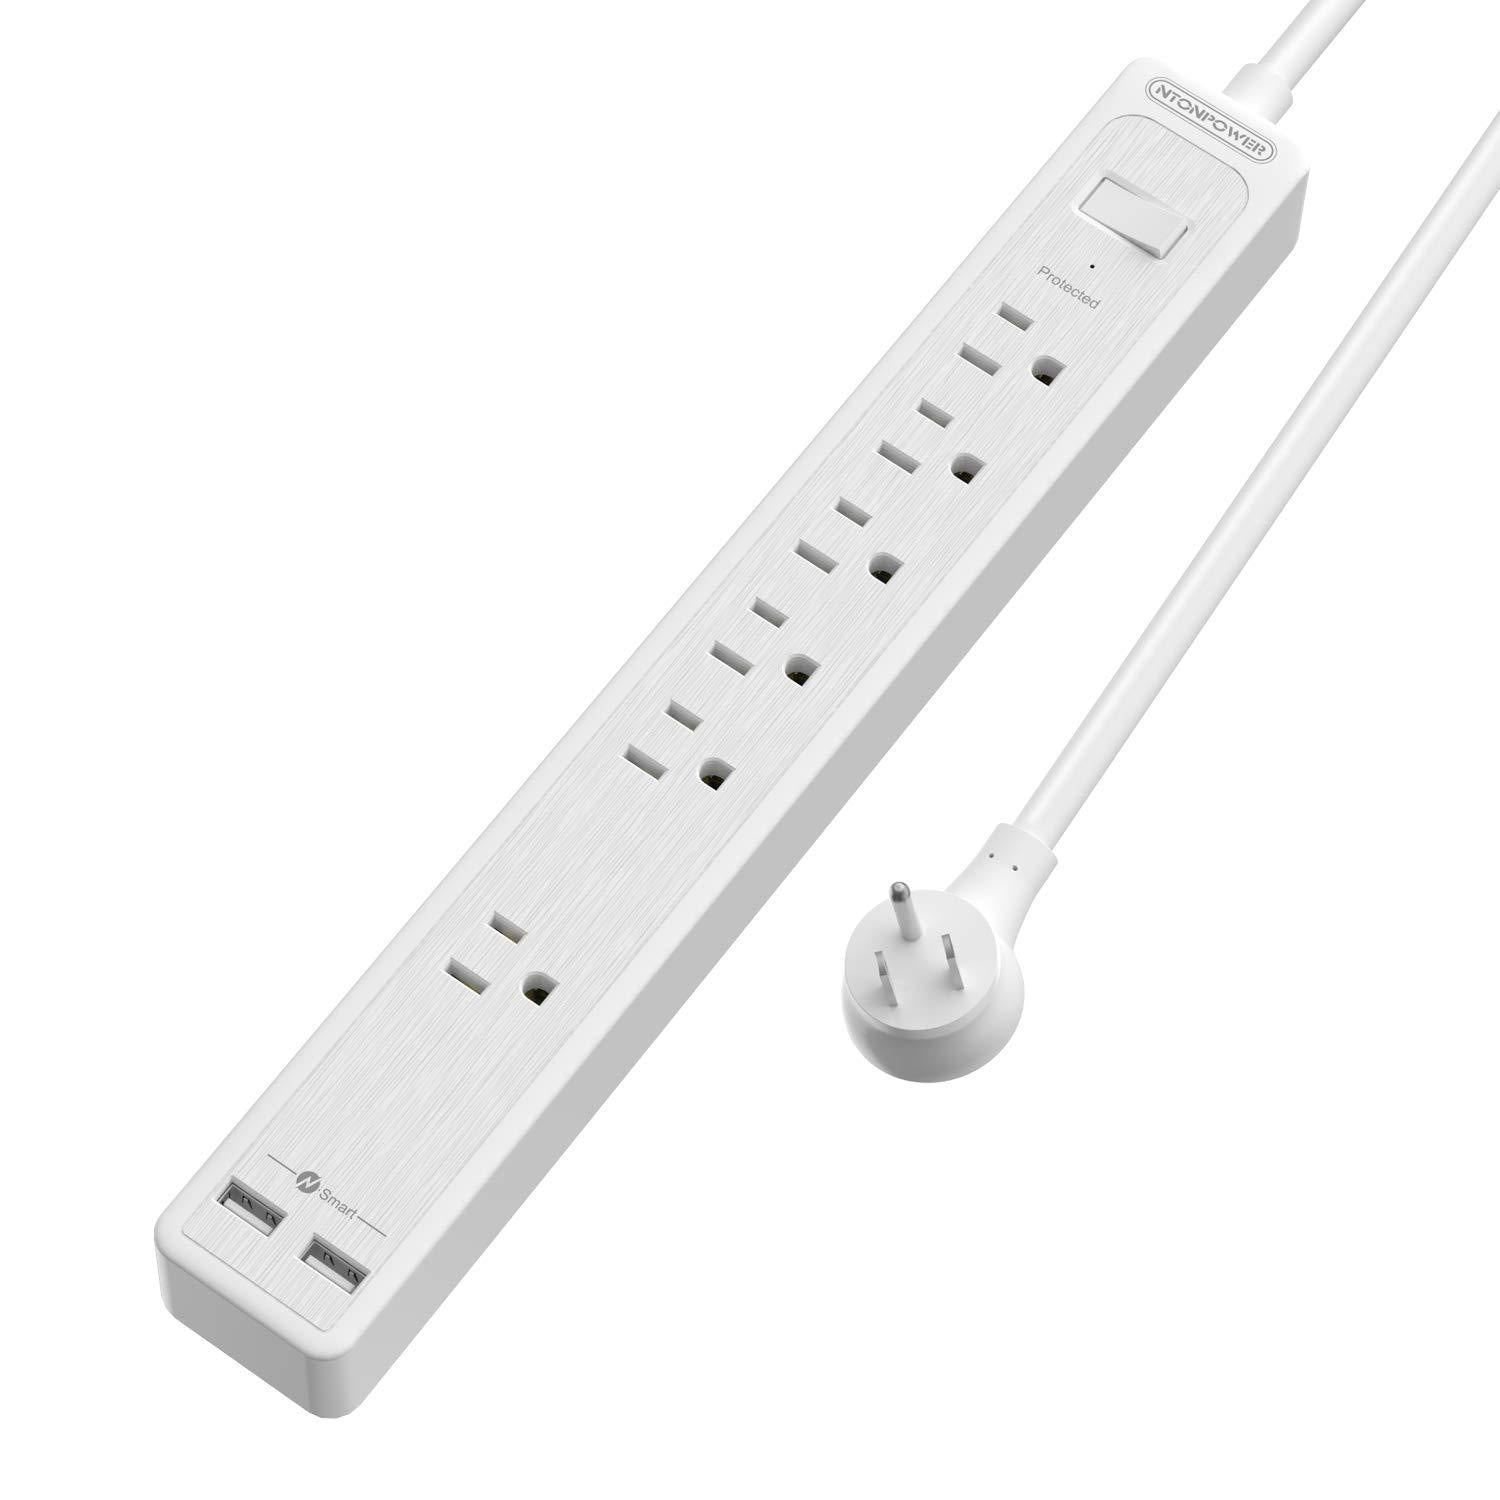 Ntonpower Surge Basic 6 Outlets Surge Protector with 2 USB Port